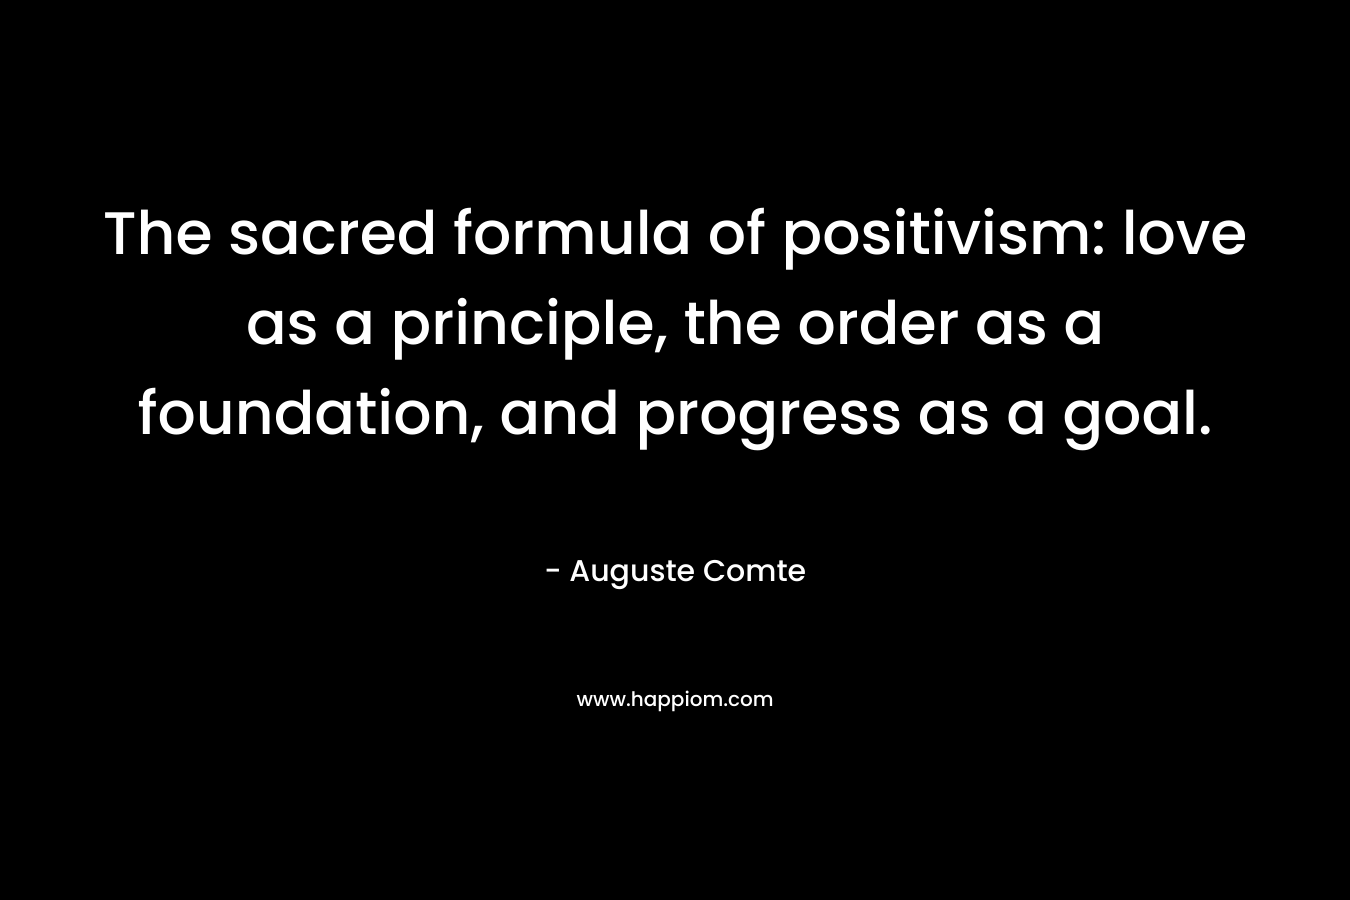 The sacred formula of positivism: love as a principle, the order as a foundation, and progress as a goal.